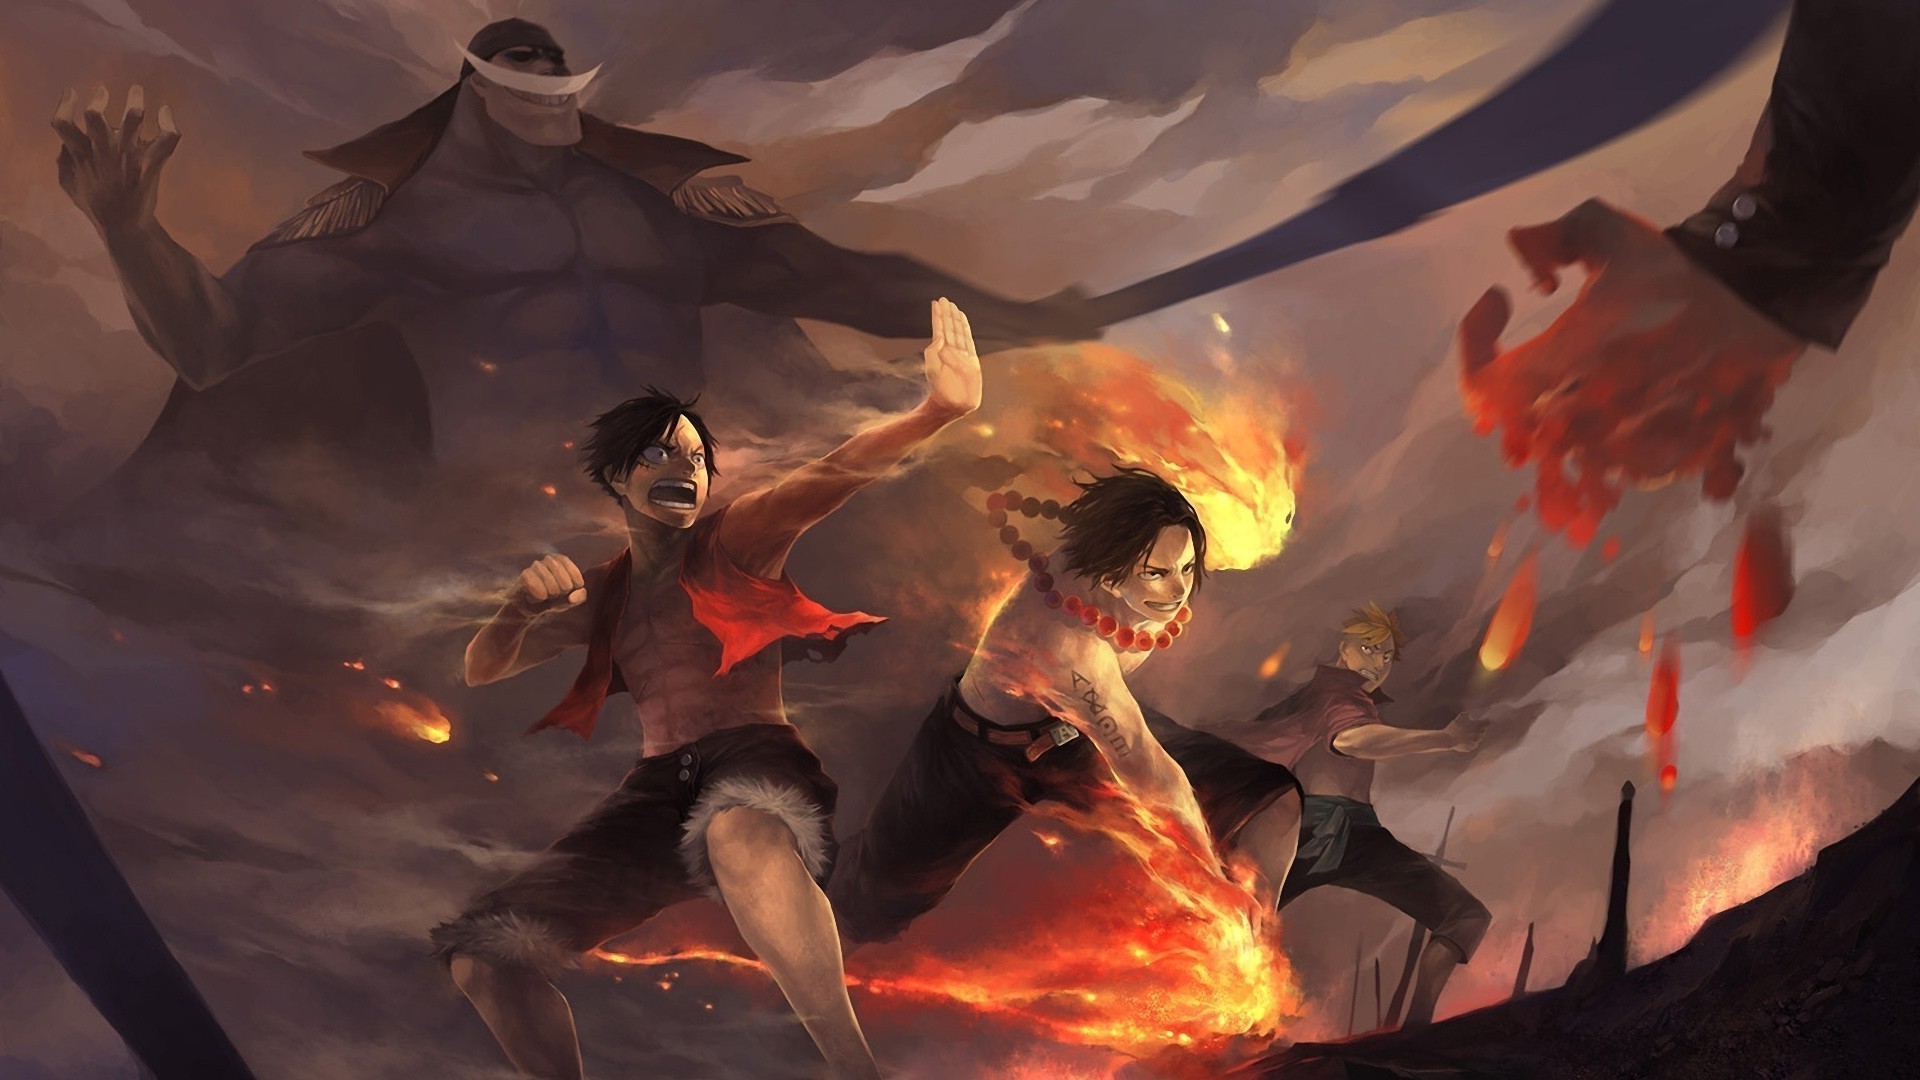 One Piece Luffy and Ace Wallpapers 67 pictures